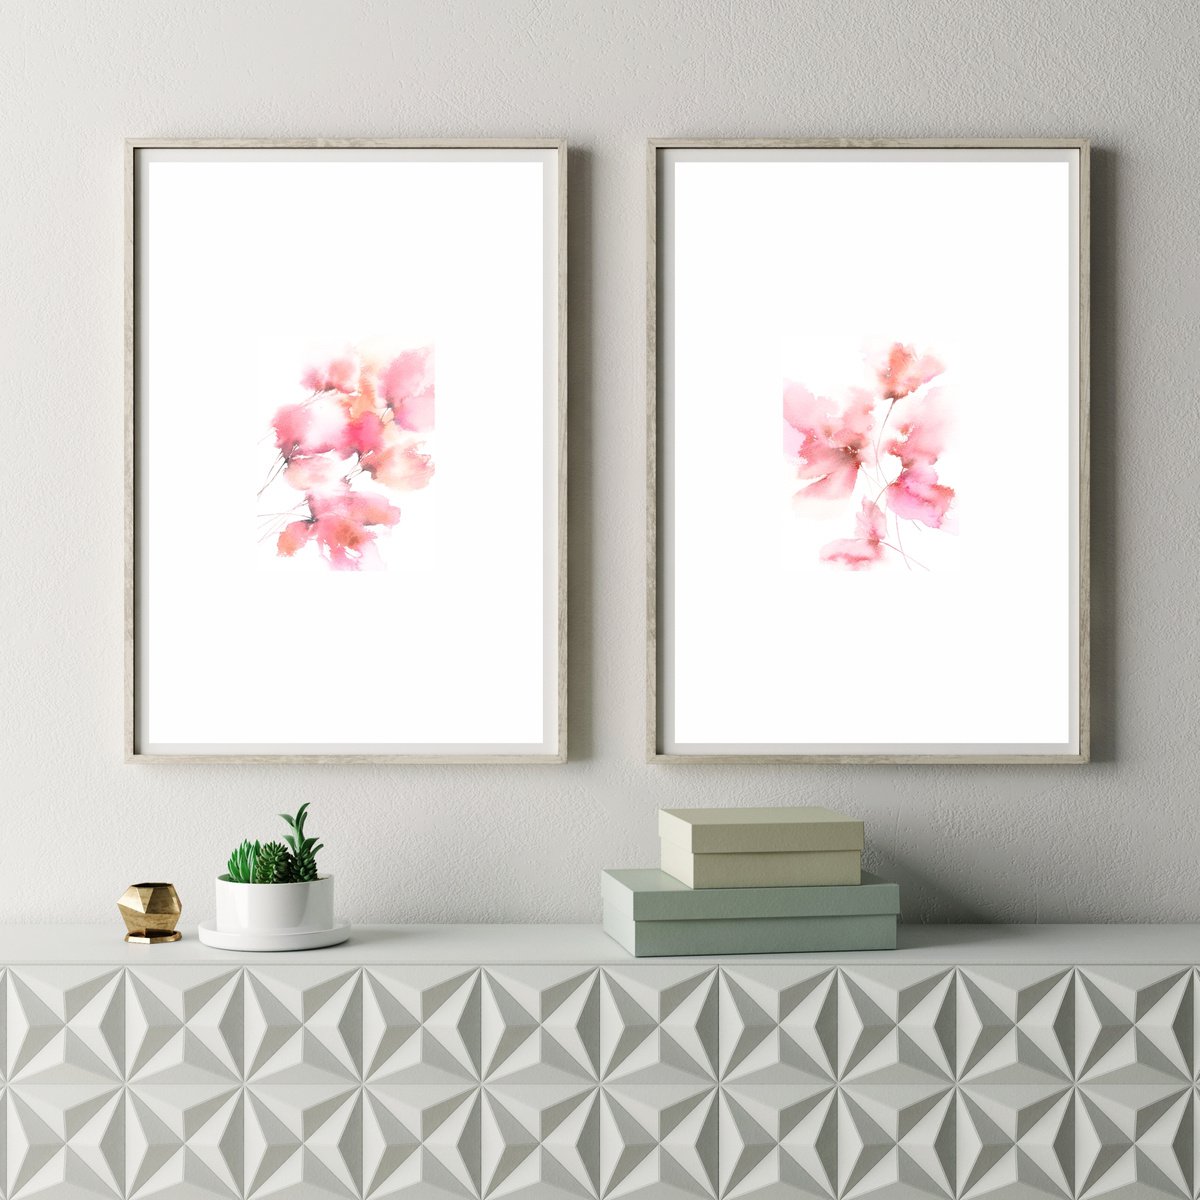 Abstract flowers, diptych Charm by Olya Grigo